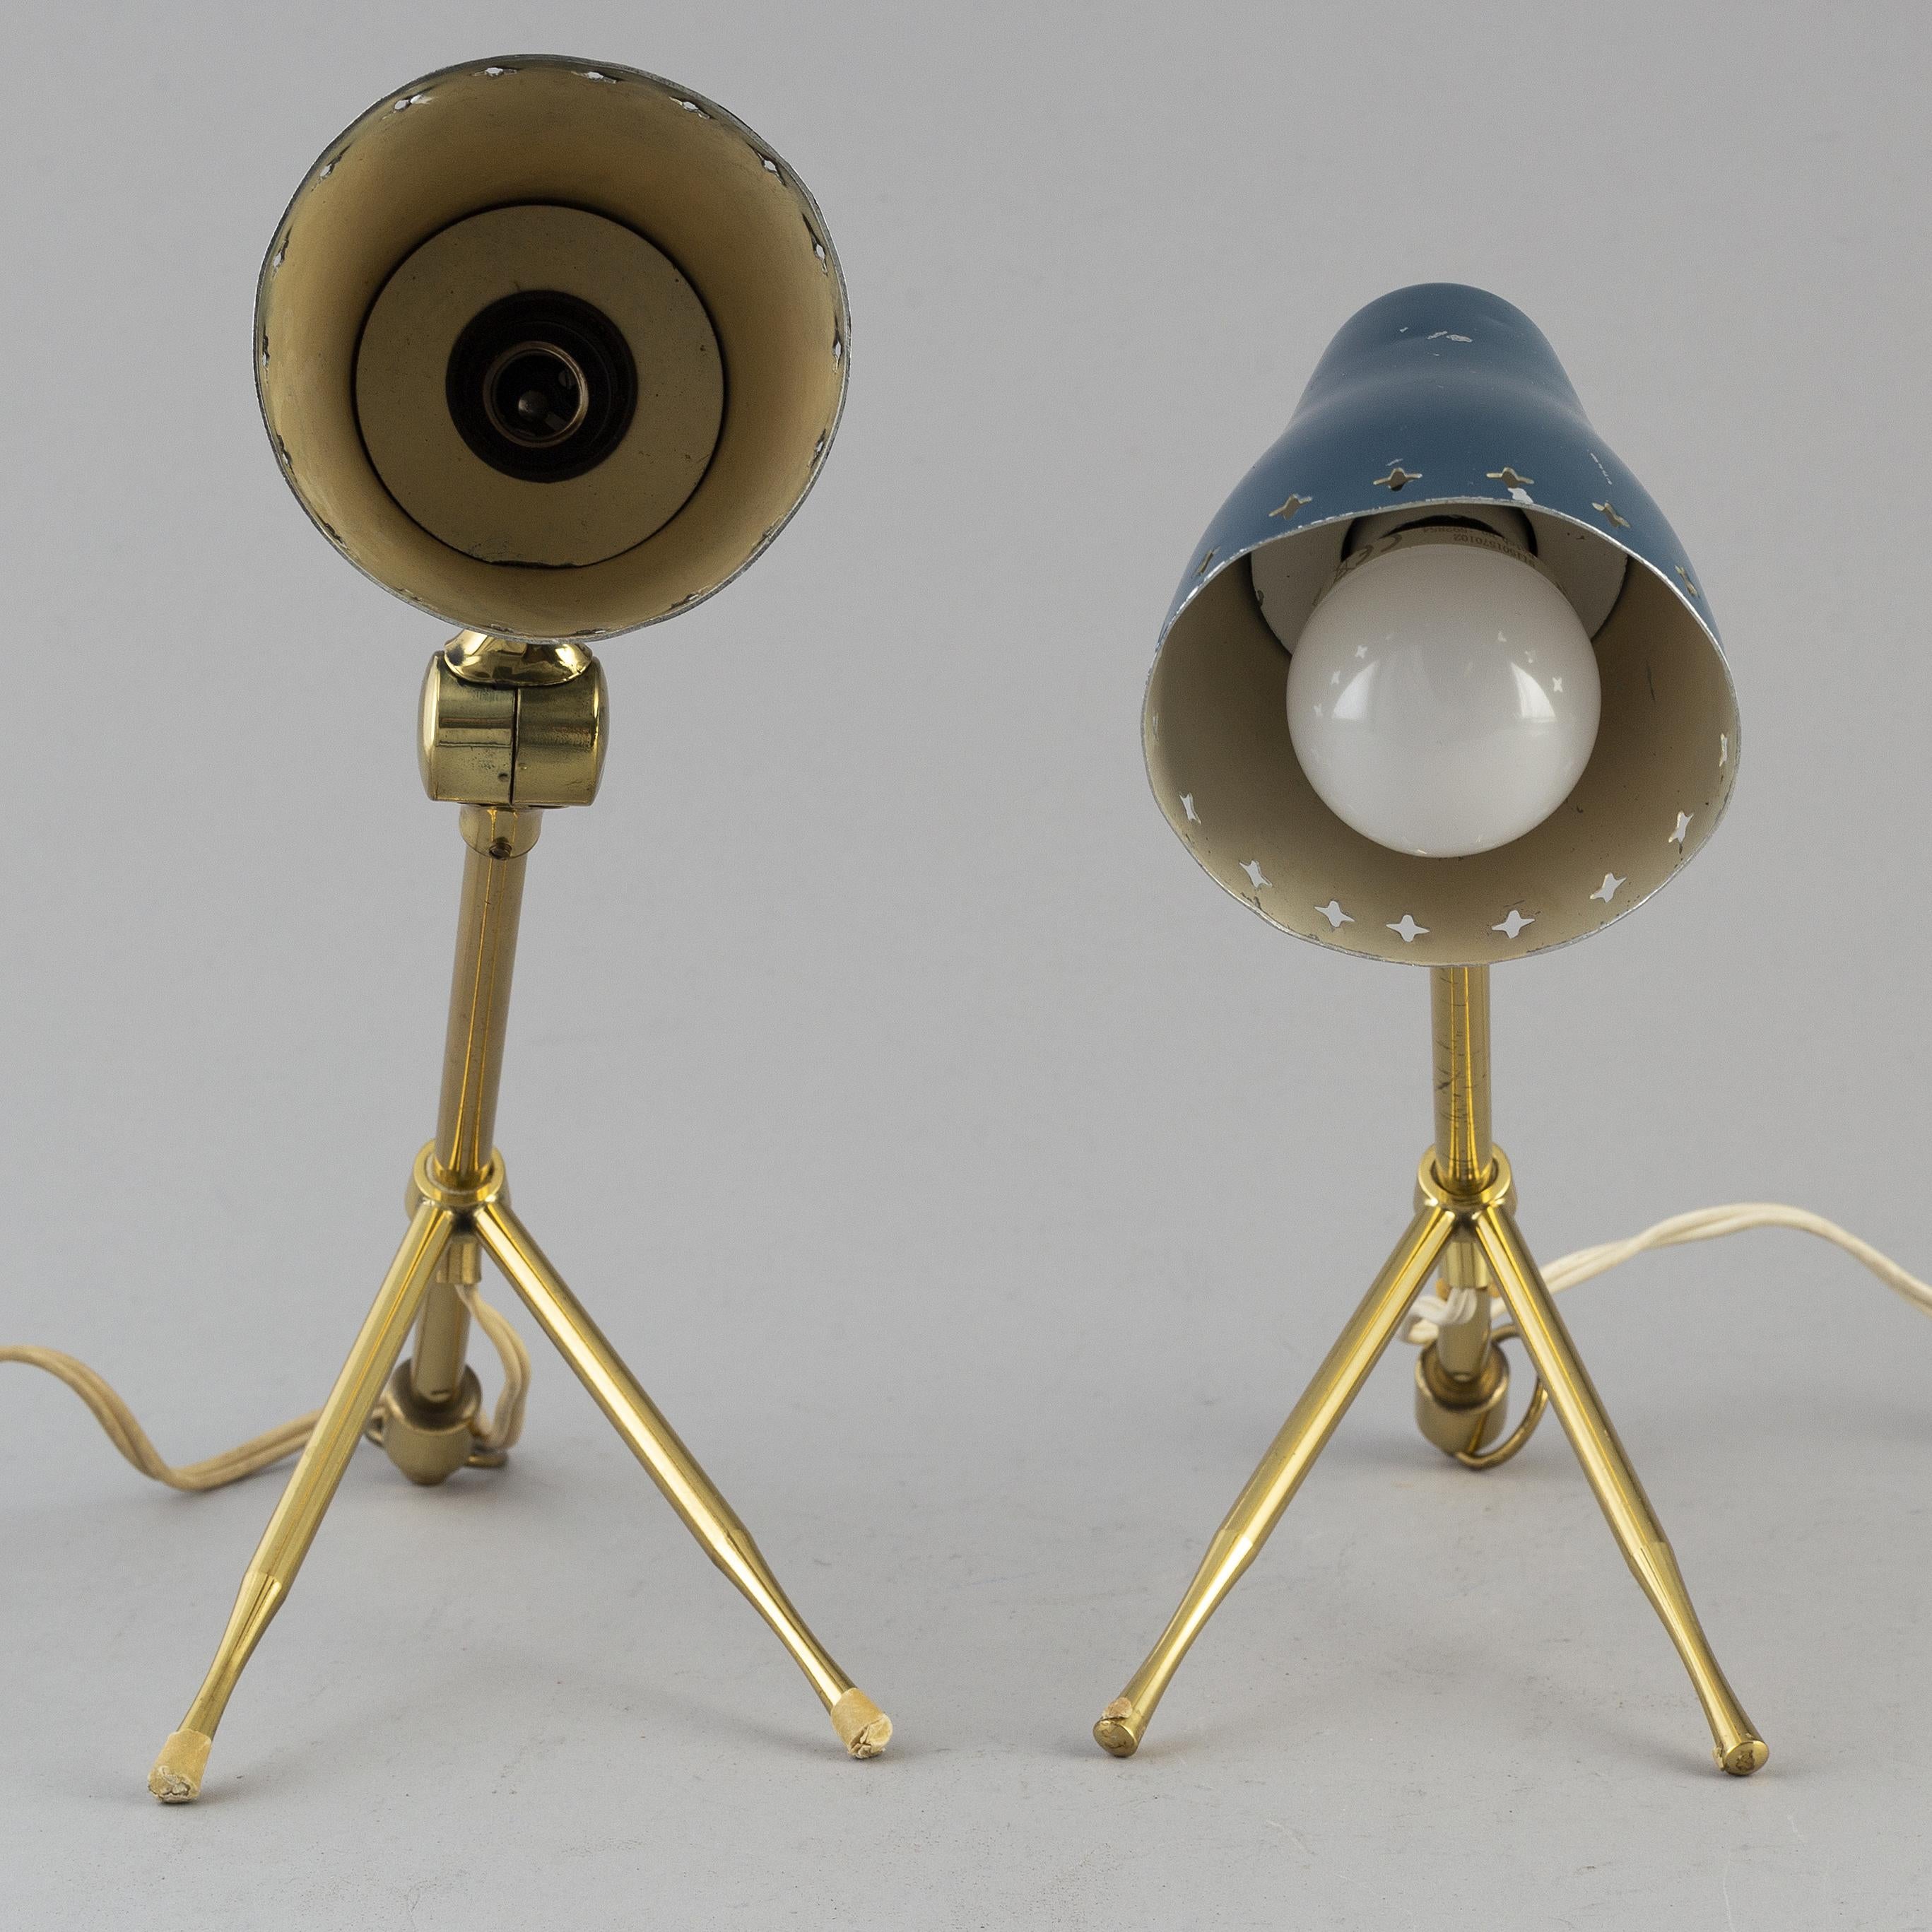 Boris Lacroix pair of table/wall lights
enameled hood with perforations, can be used as a table or wall lamp.
Size: Length 35 cm.

Electrical function not tested. Minor wear with some chipping as shown in images. Price per item.

     